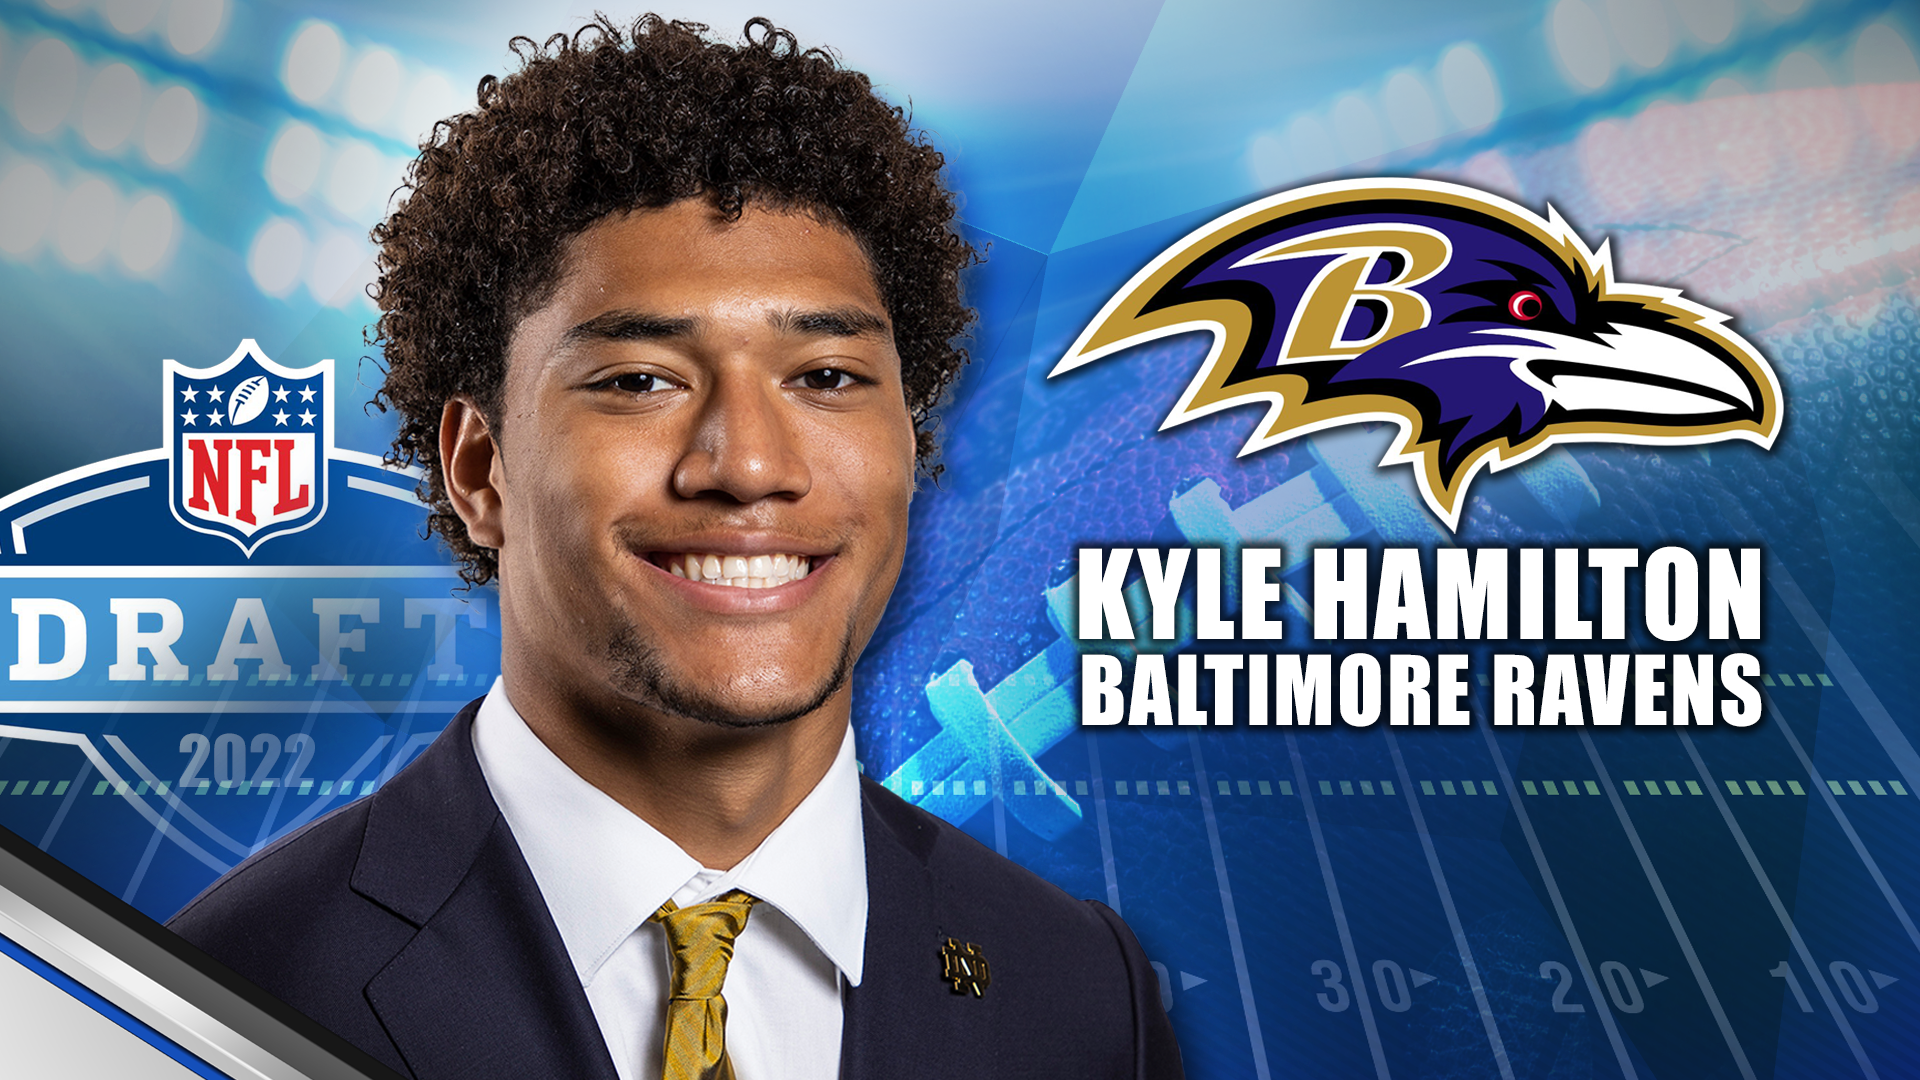 Kyle Hamilton selected 14th by Baltimore Ravens in 2022 NFL Draft